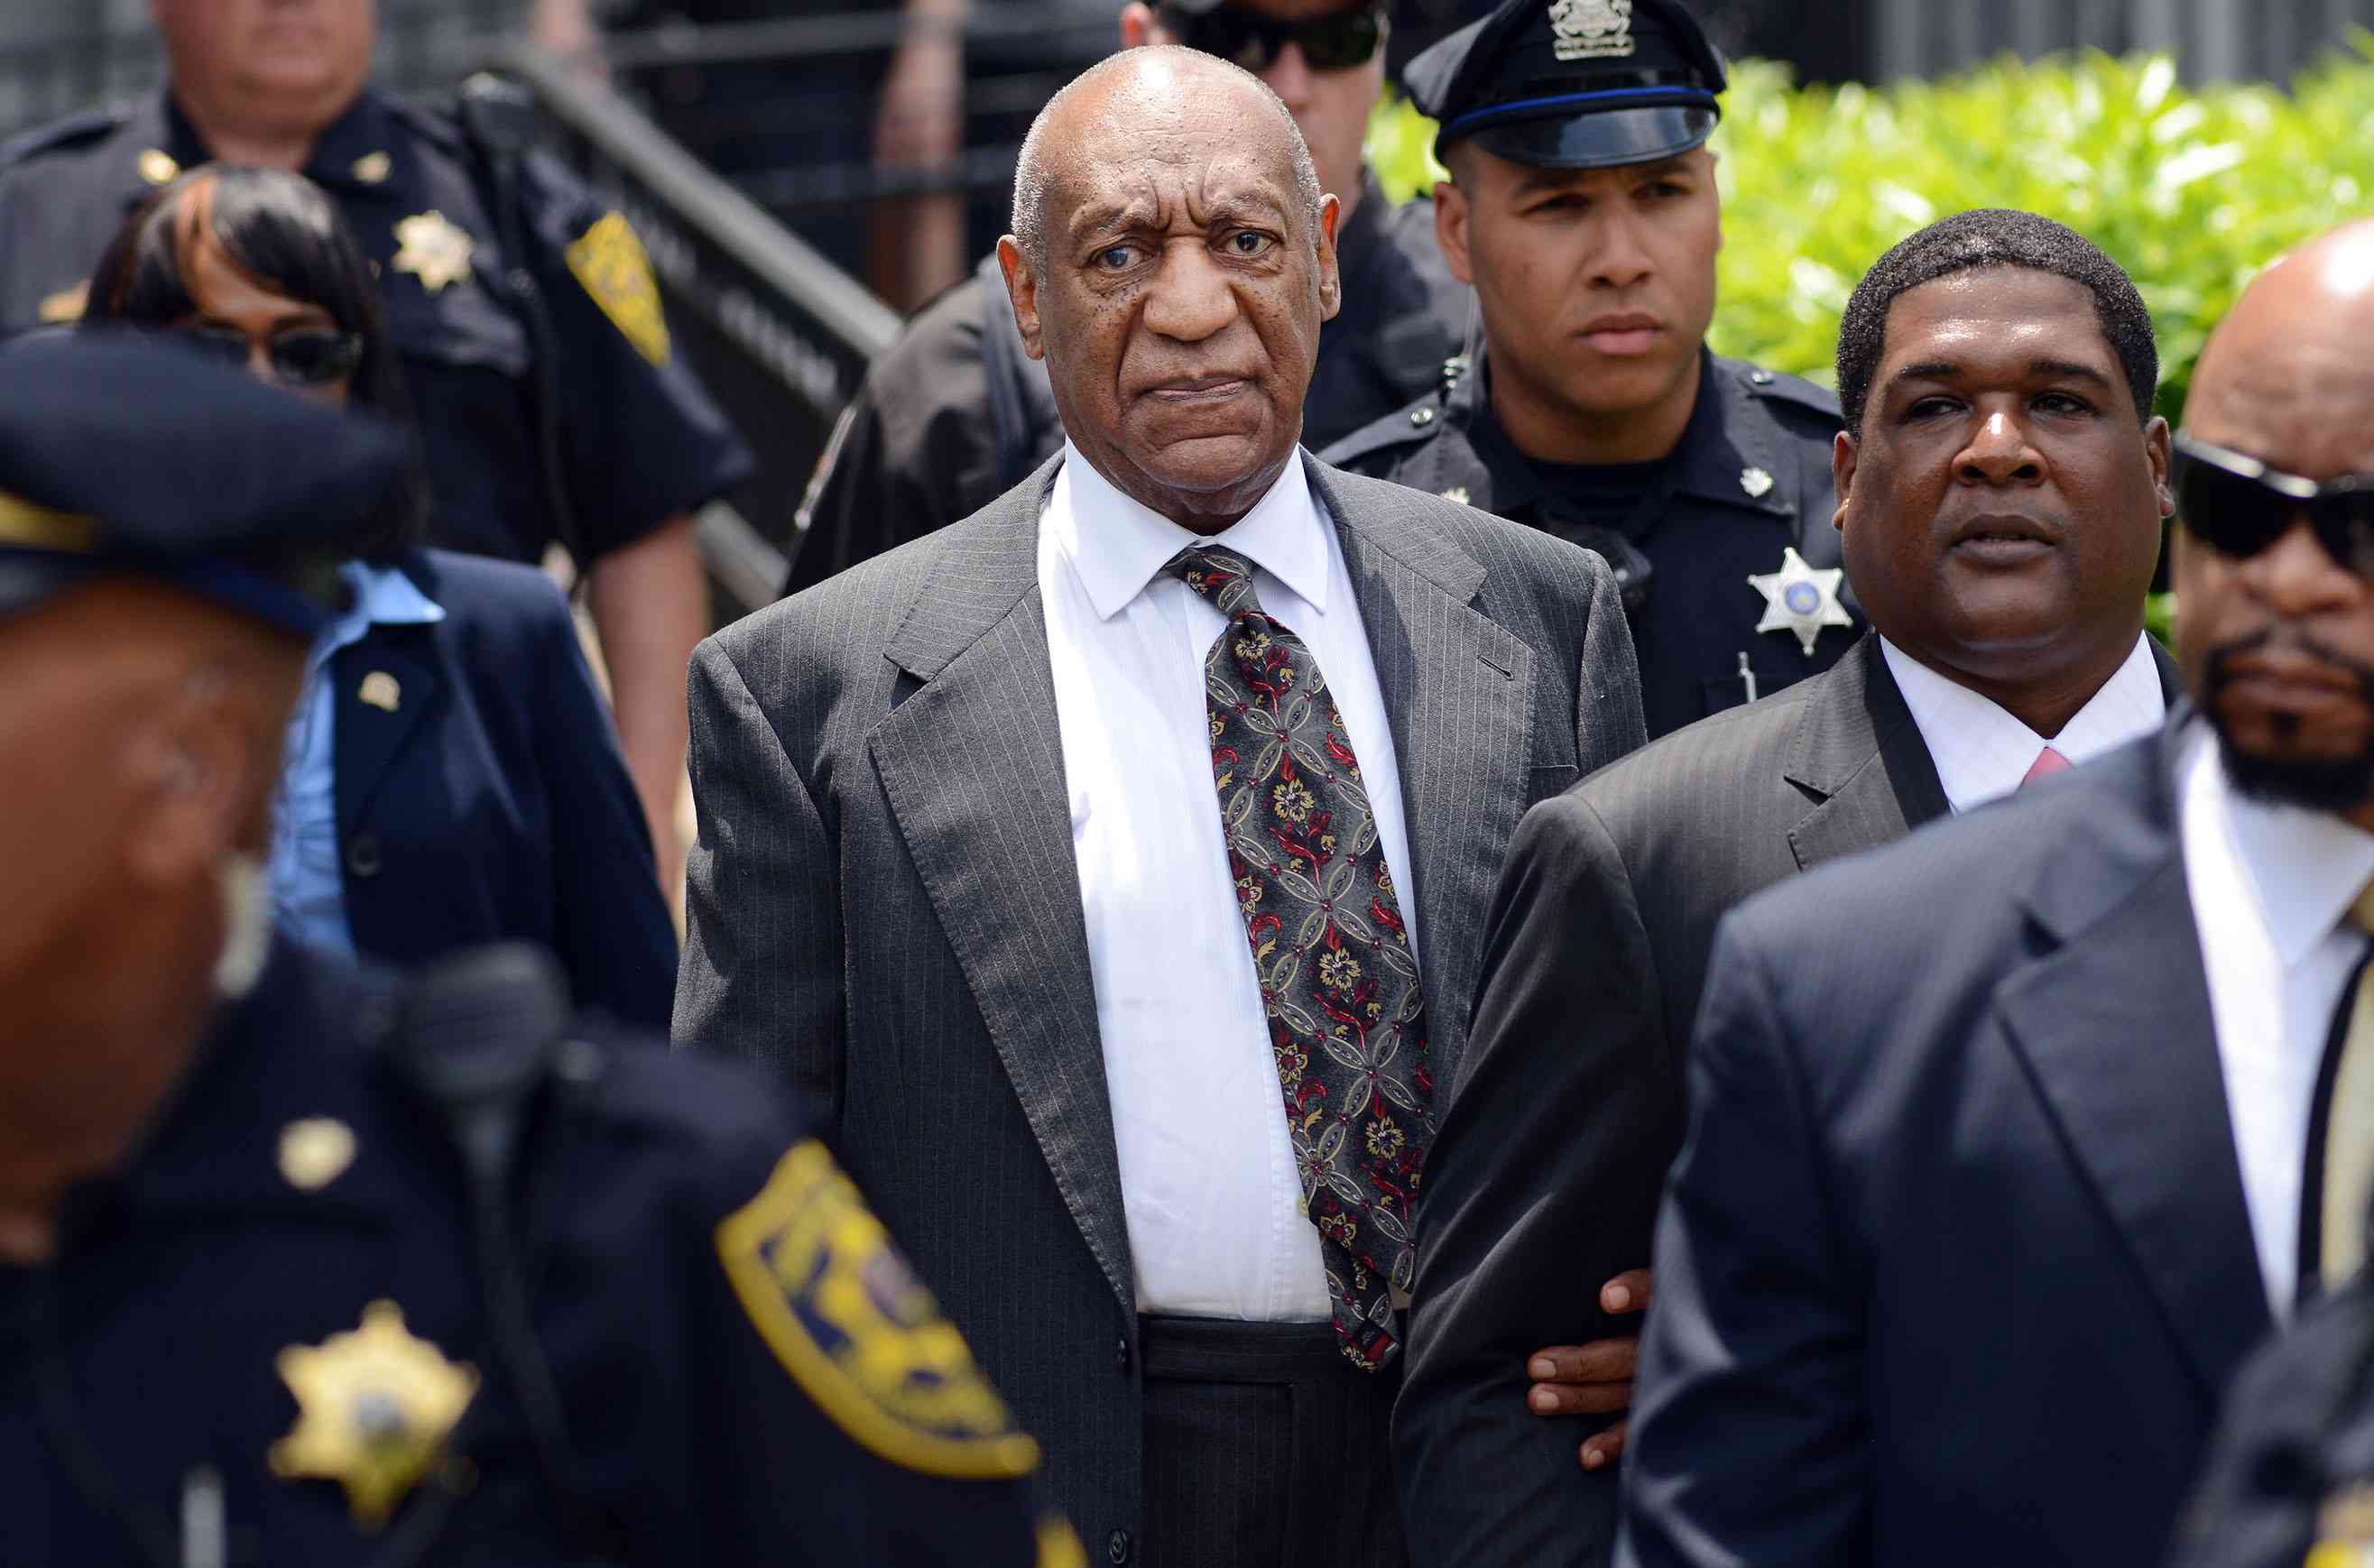 Bill Cosby leaves a preliminary hearing on sexual assault charges